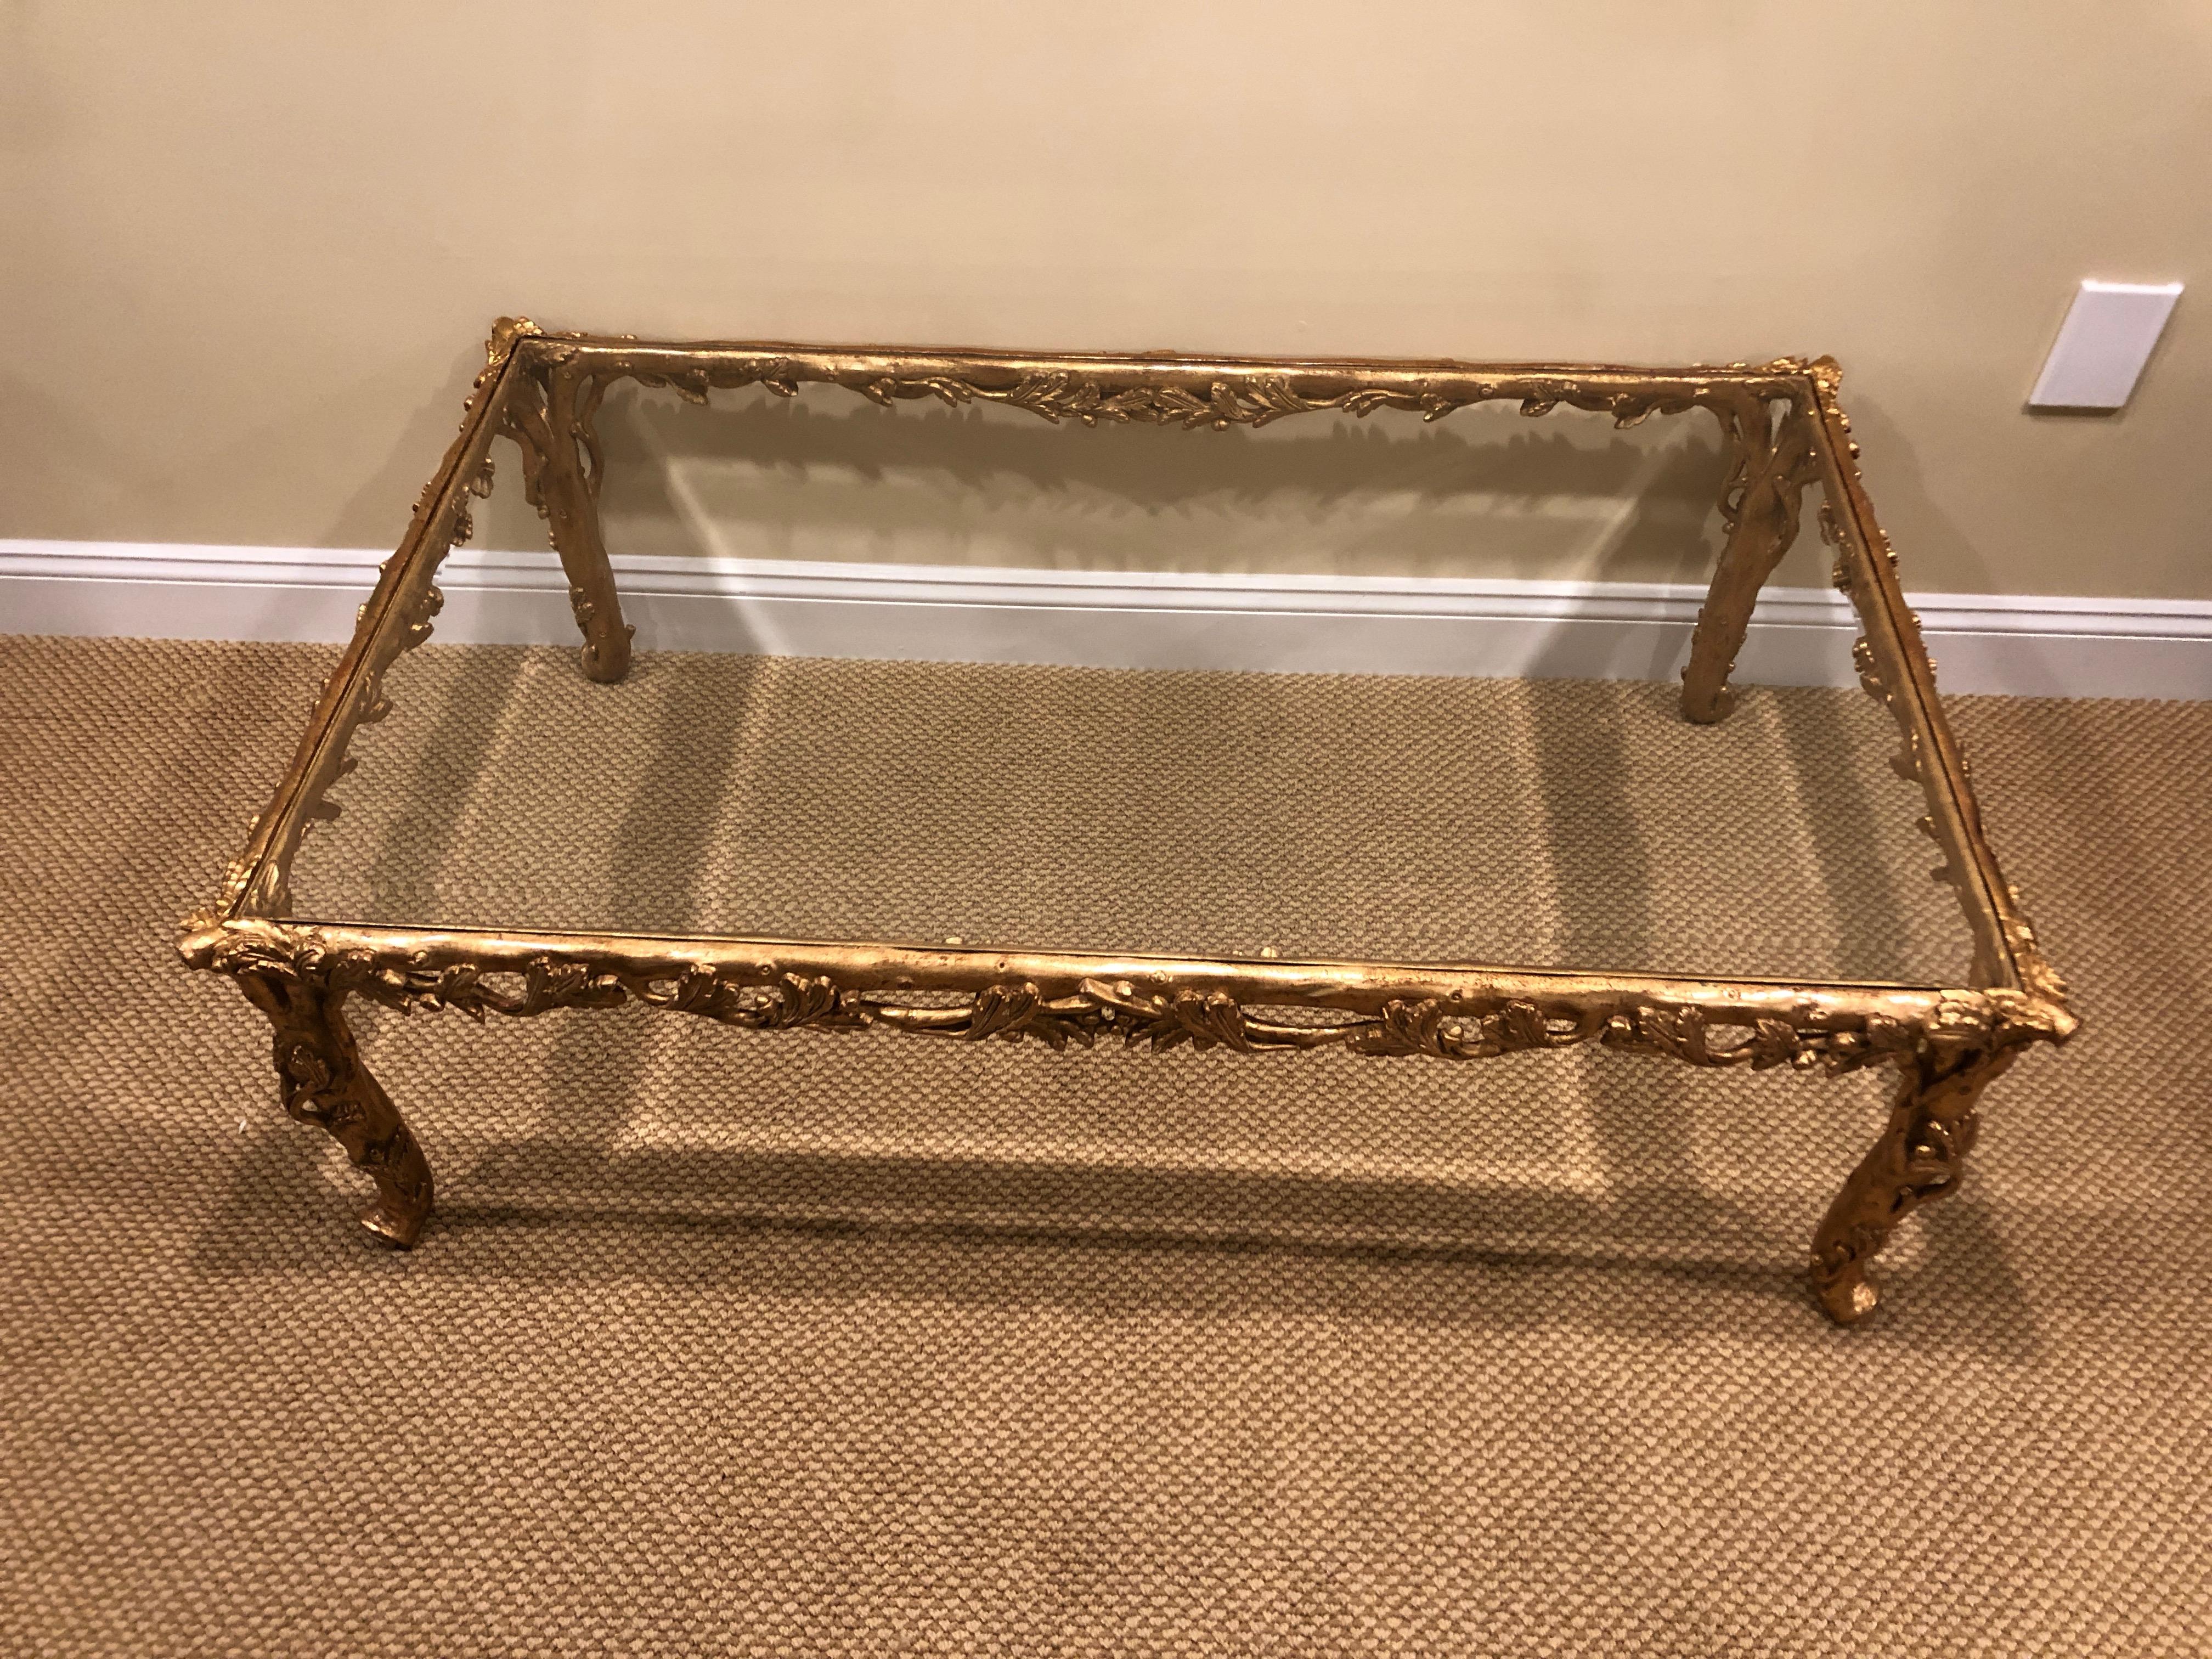 A very rare and uber glamorous coffee table signed and marked Made in Italy, having a elaborately decorated sculpted gold resin base. The base is amazingly light because of the material, but strong enough to support a handsome beveled piece of glass.